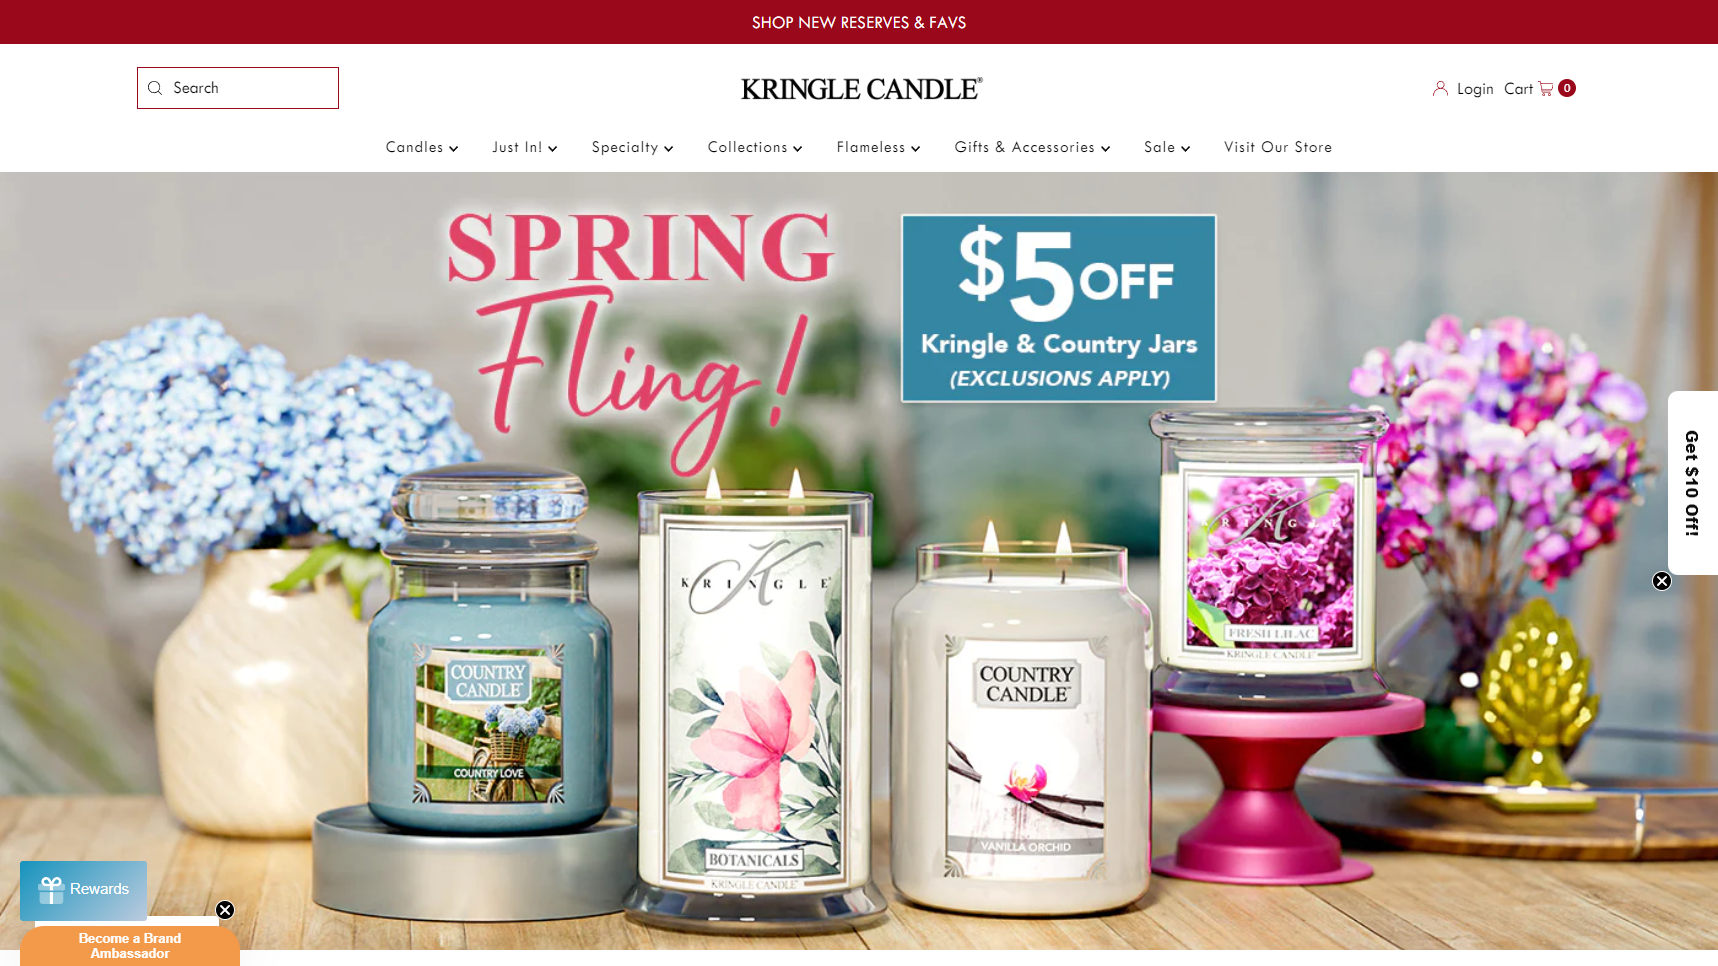 Kringle Candle - Candle Manufacturer